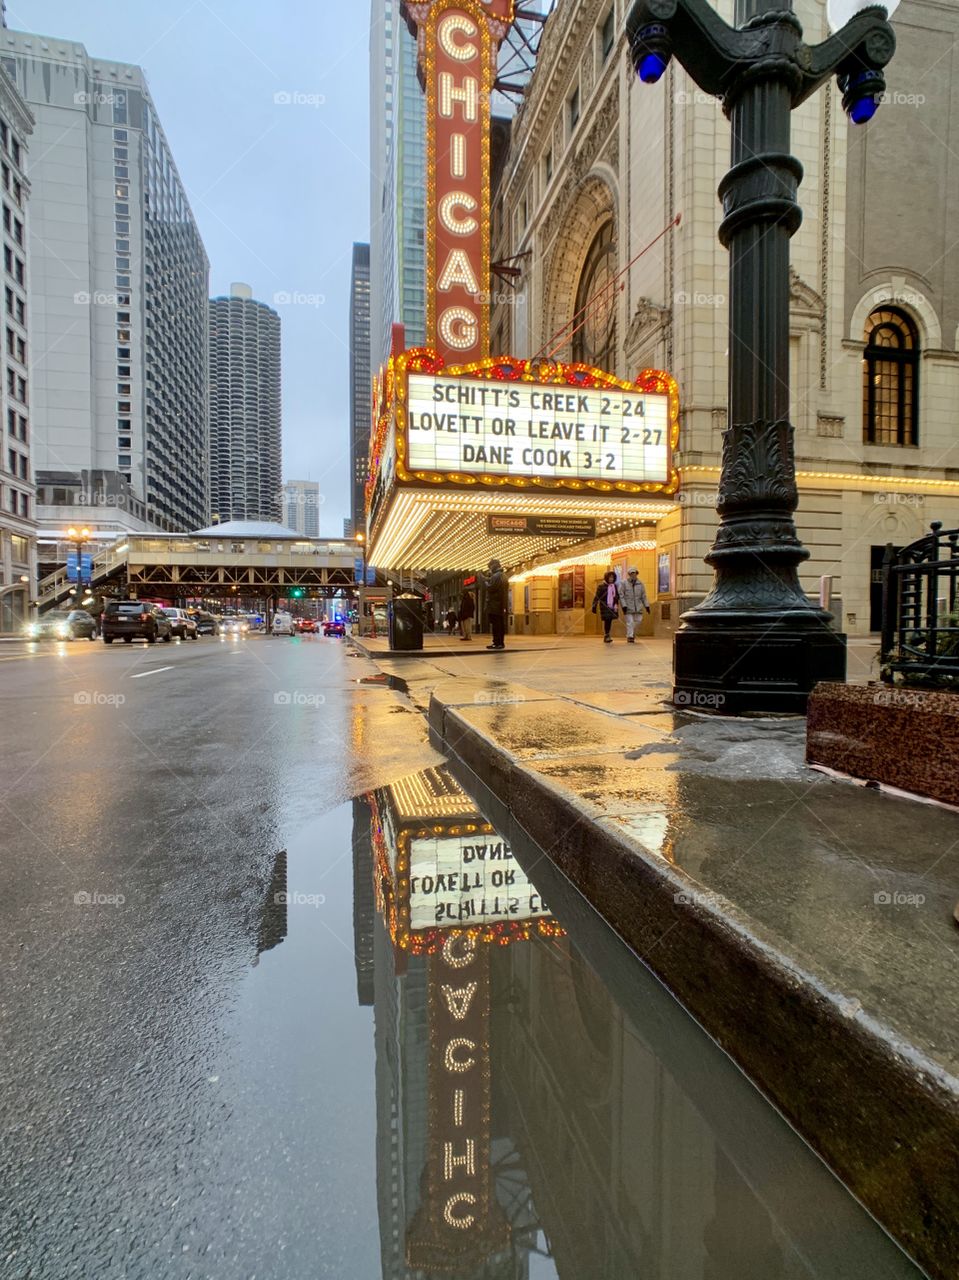 Chicago Theater sign reflecting in a puddle on February 20, 2019. Sign advertising Schitt’s Creek, Lovett or Leave It, and Dane Cook. 